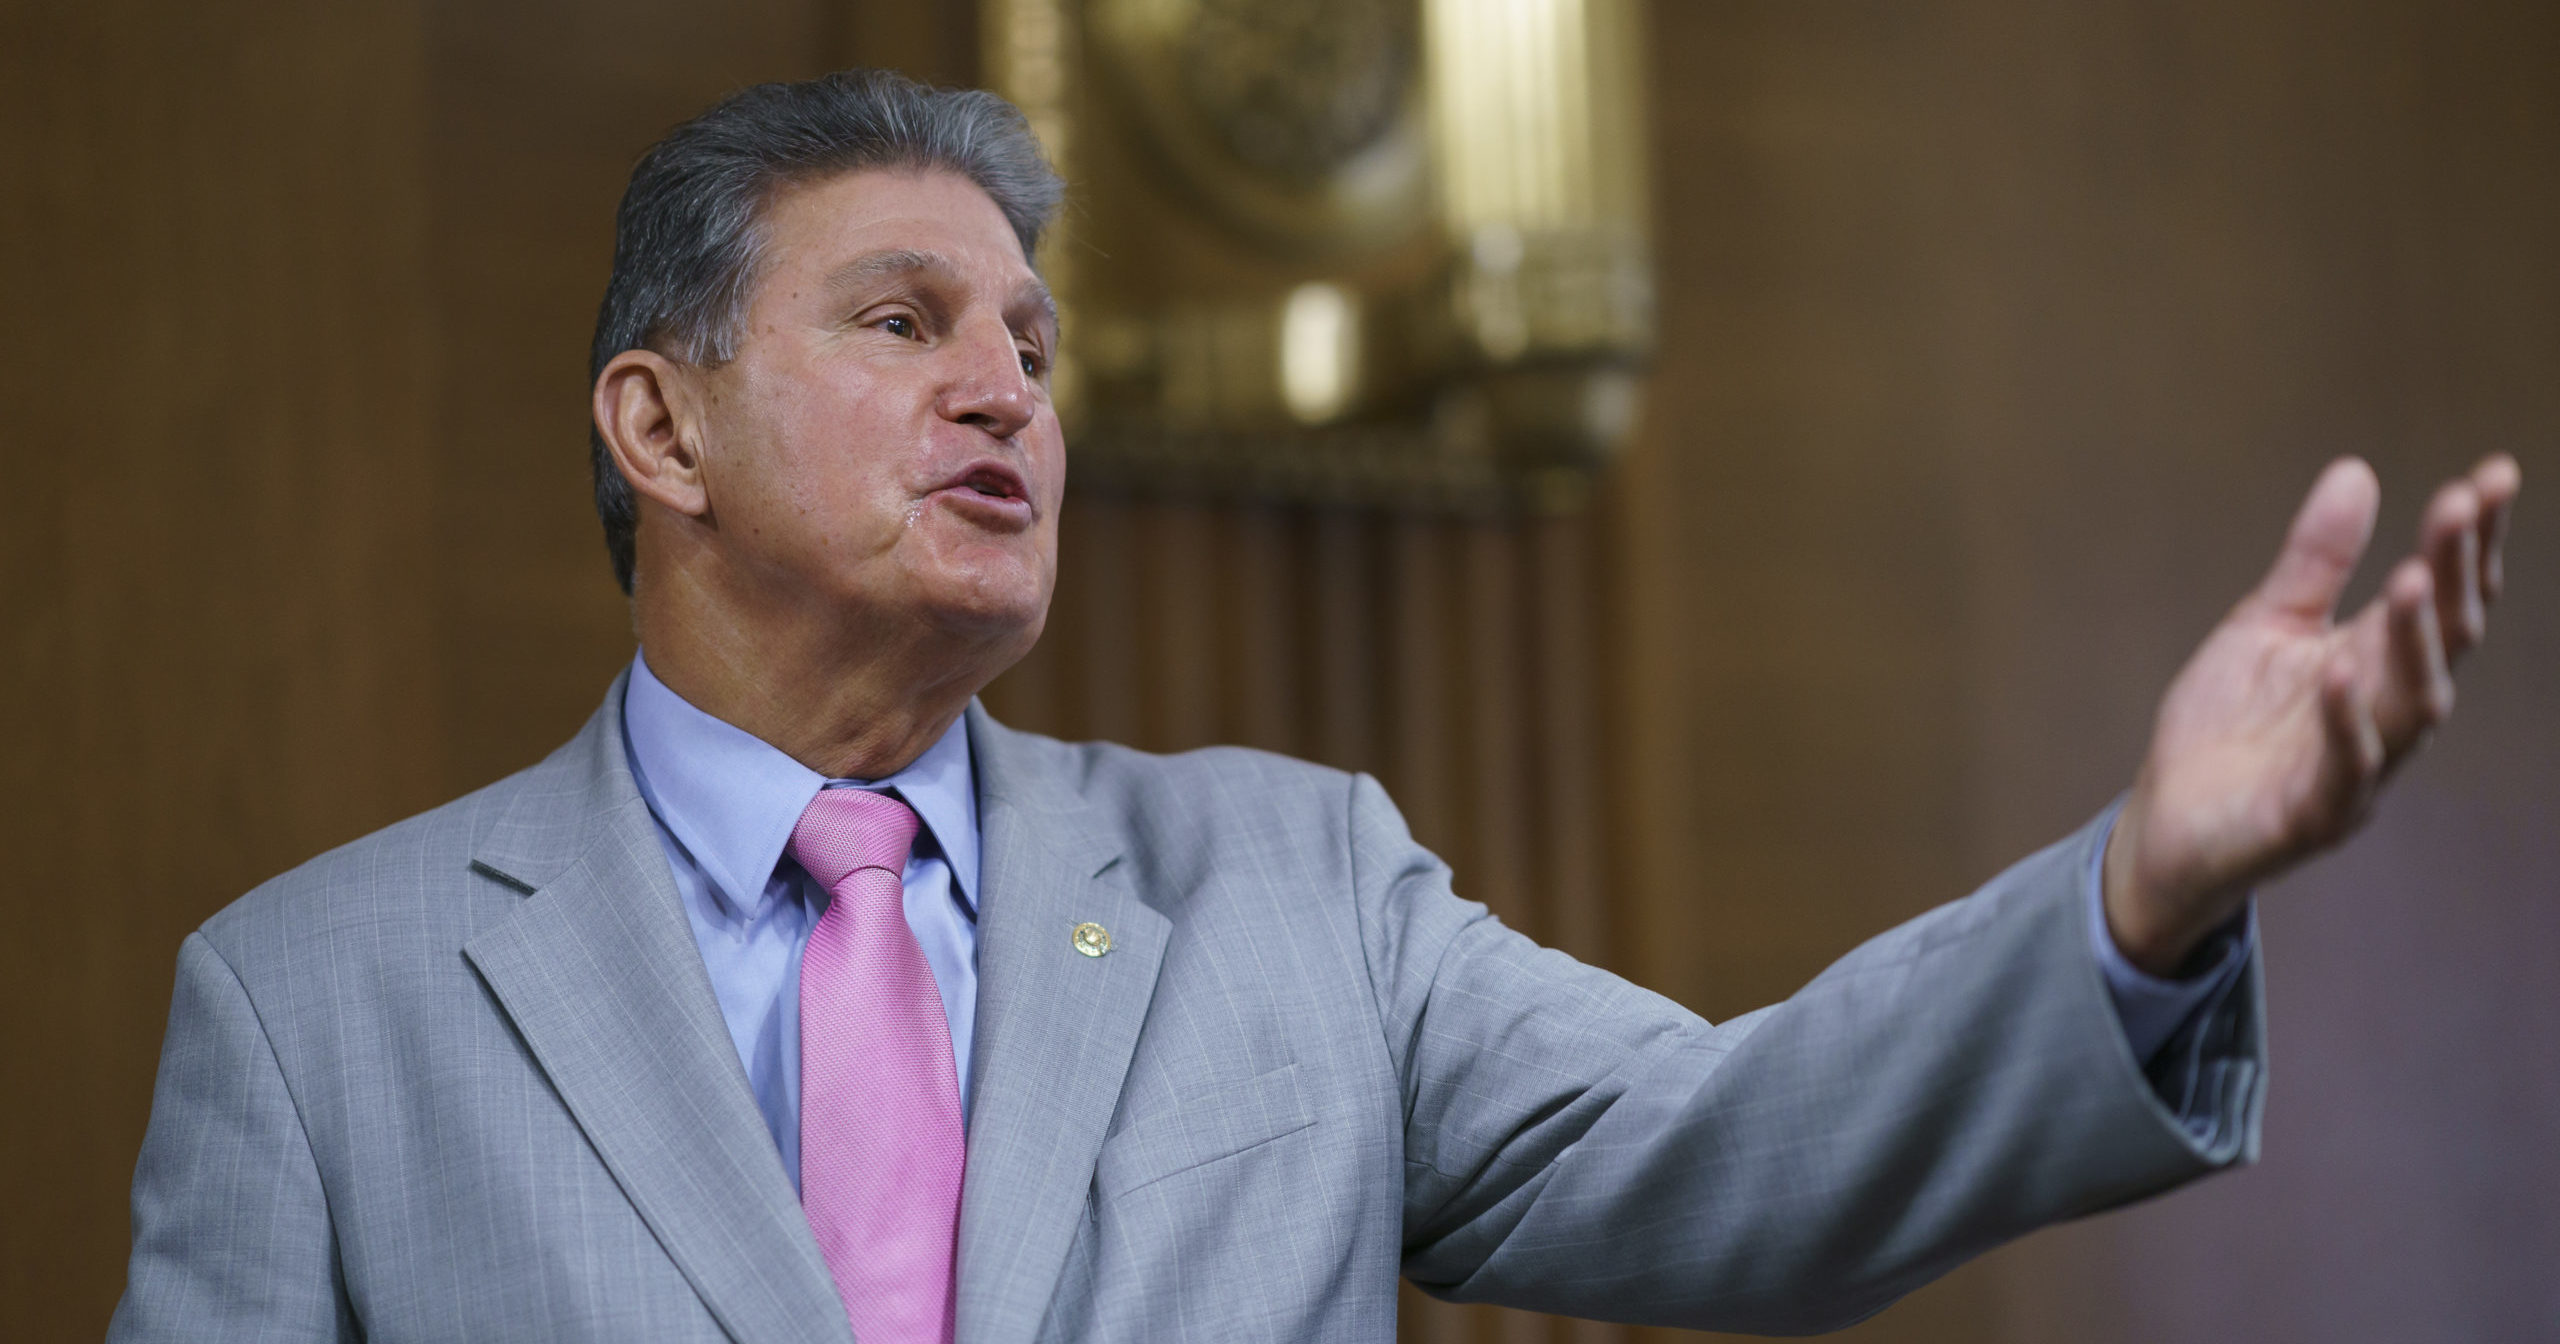 Sen. Joe Manchin of West Virginia speaks during a hearing of the Senate Energy and Natural Resources Committee at the U.S. Capitol in Washington, D.C., on Thursday.